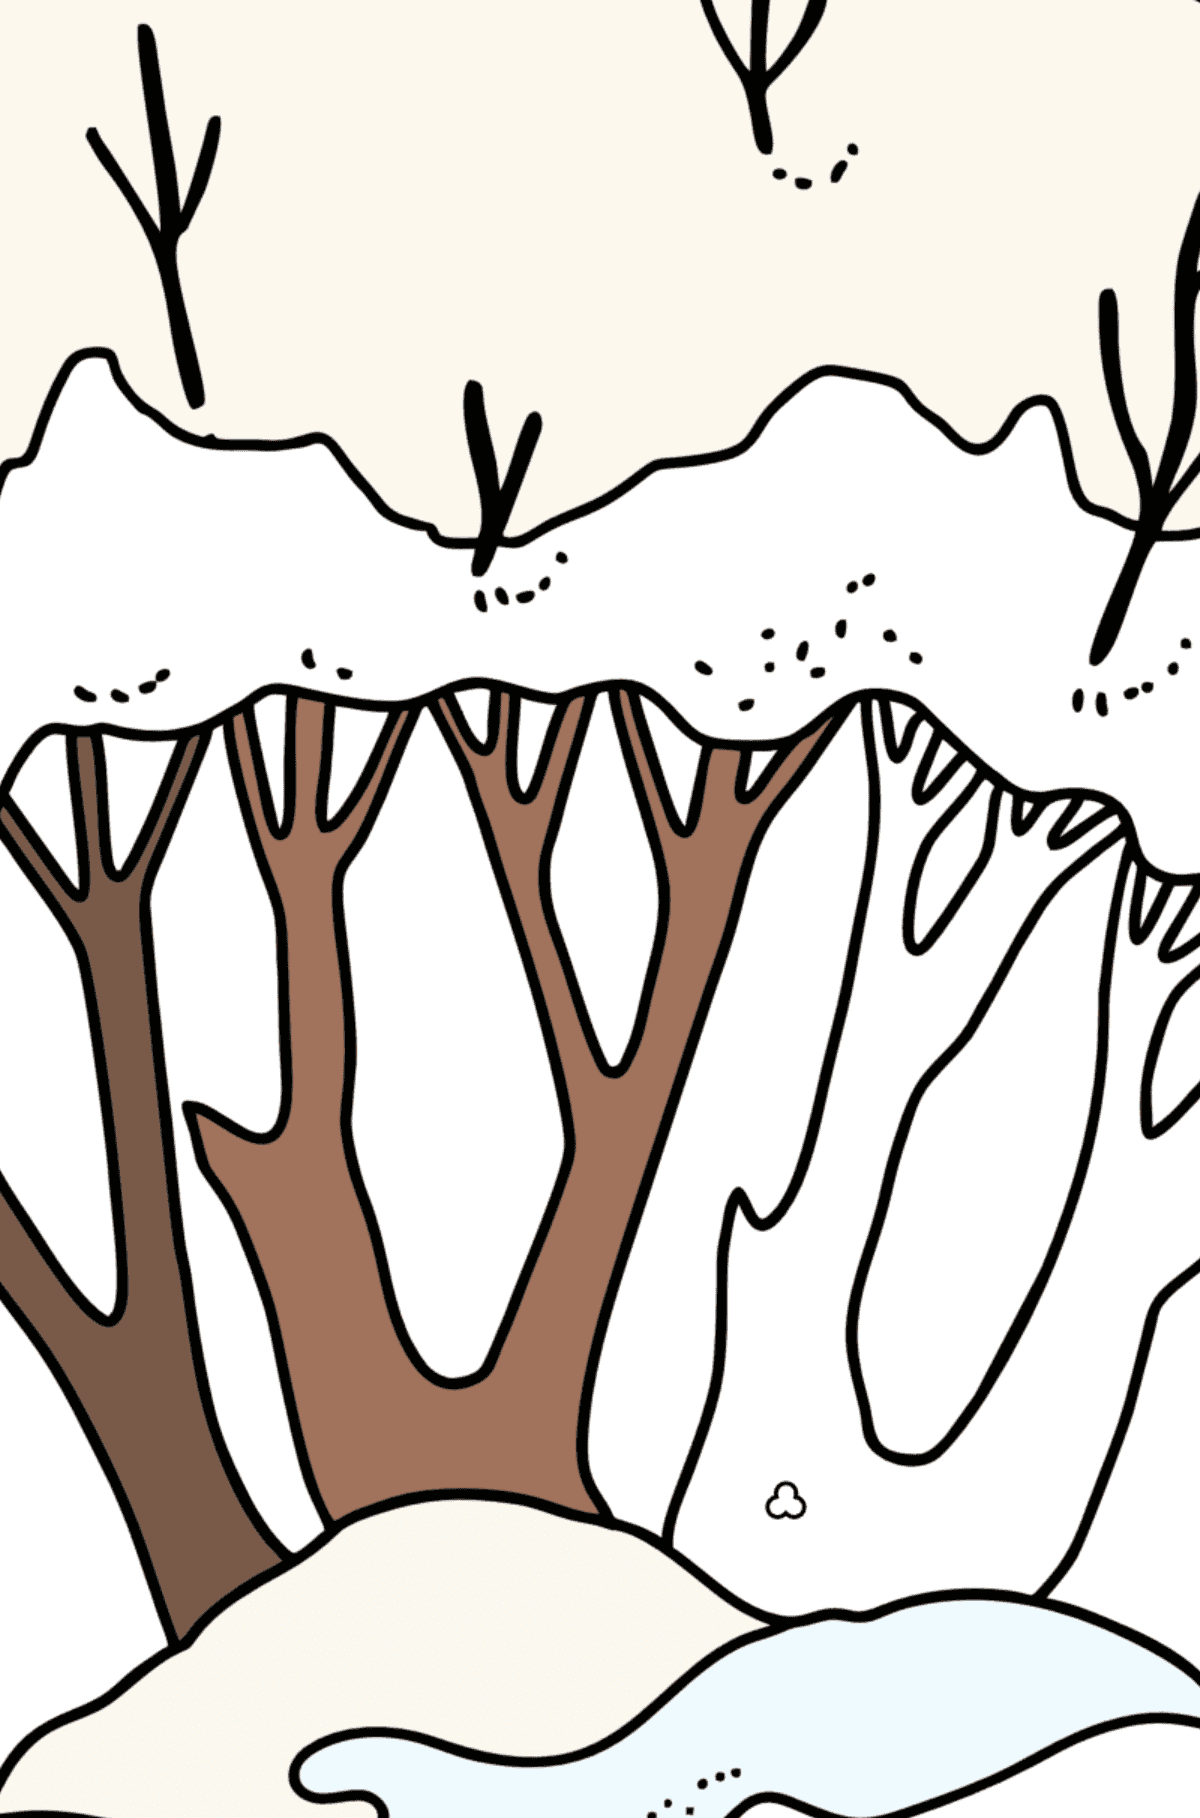 Winter Trees coloring page - Coloring by Symbols and Geometric Shapes for Kids